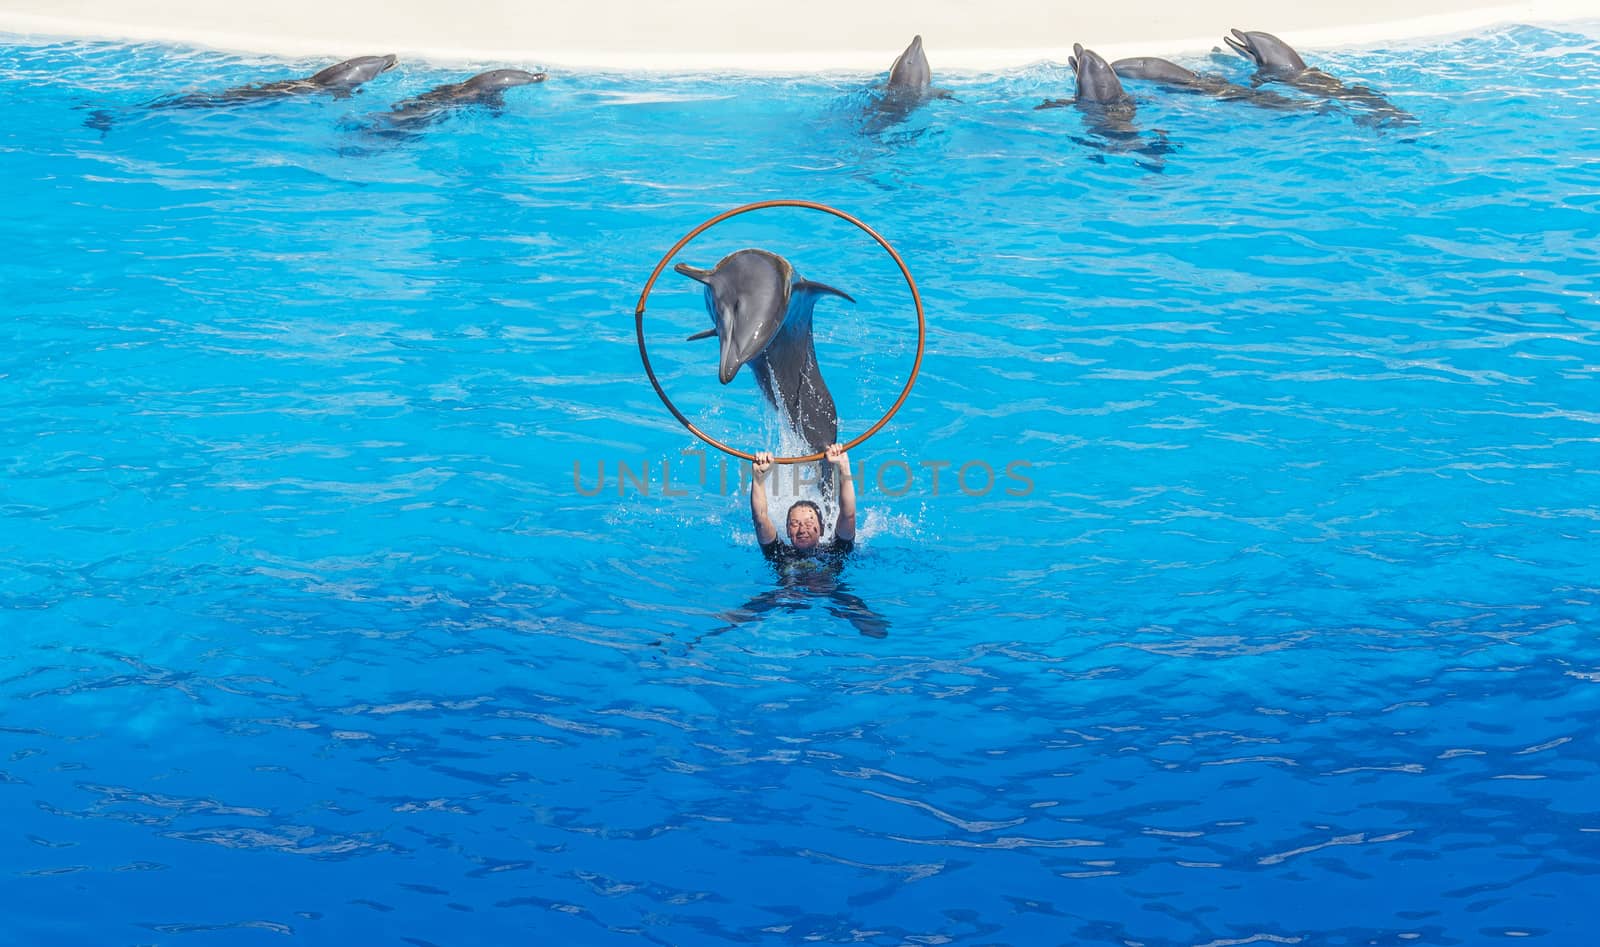 Dolphin jumping into the hoop over the water on the dolphin show by Grommik